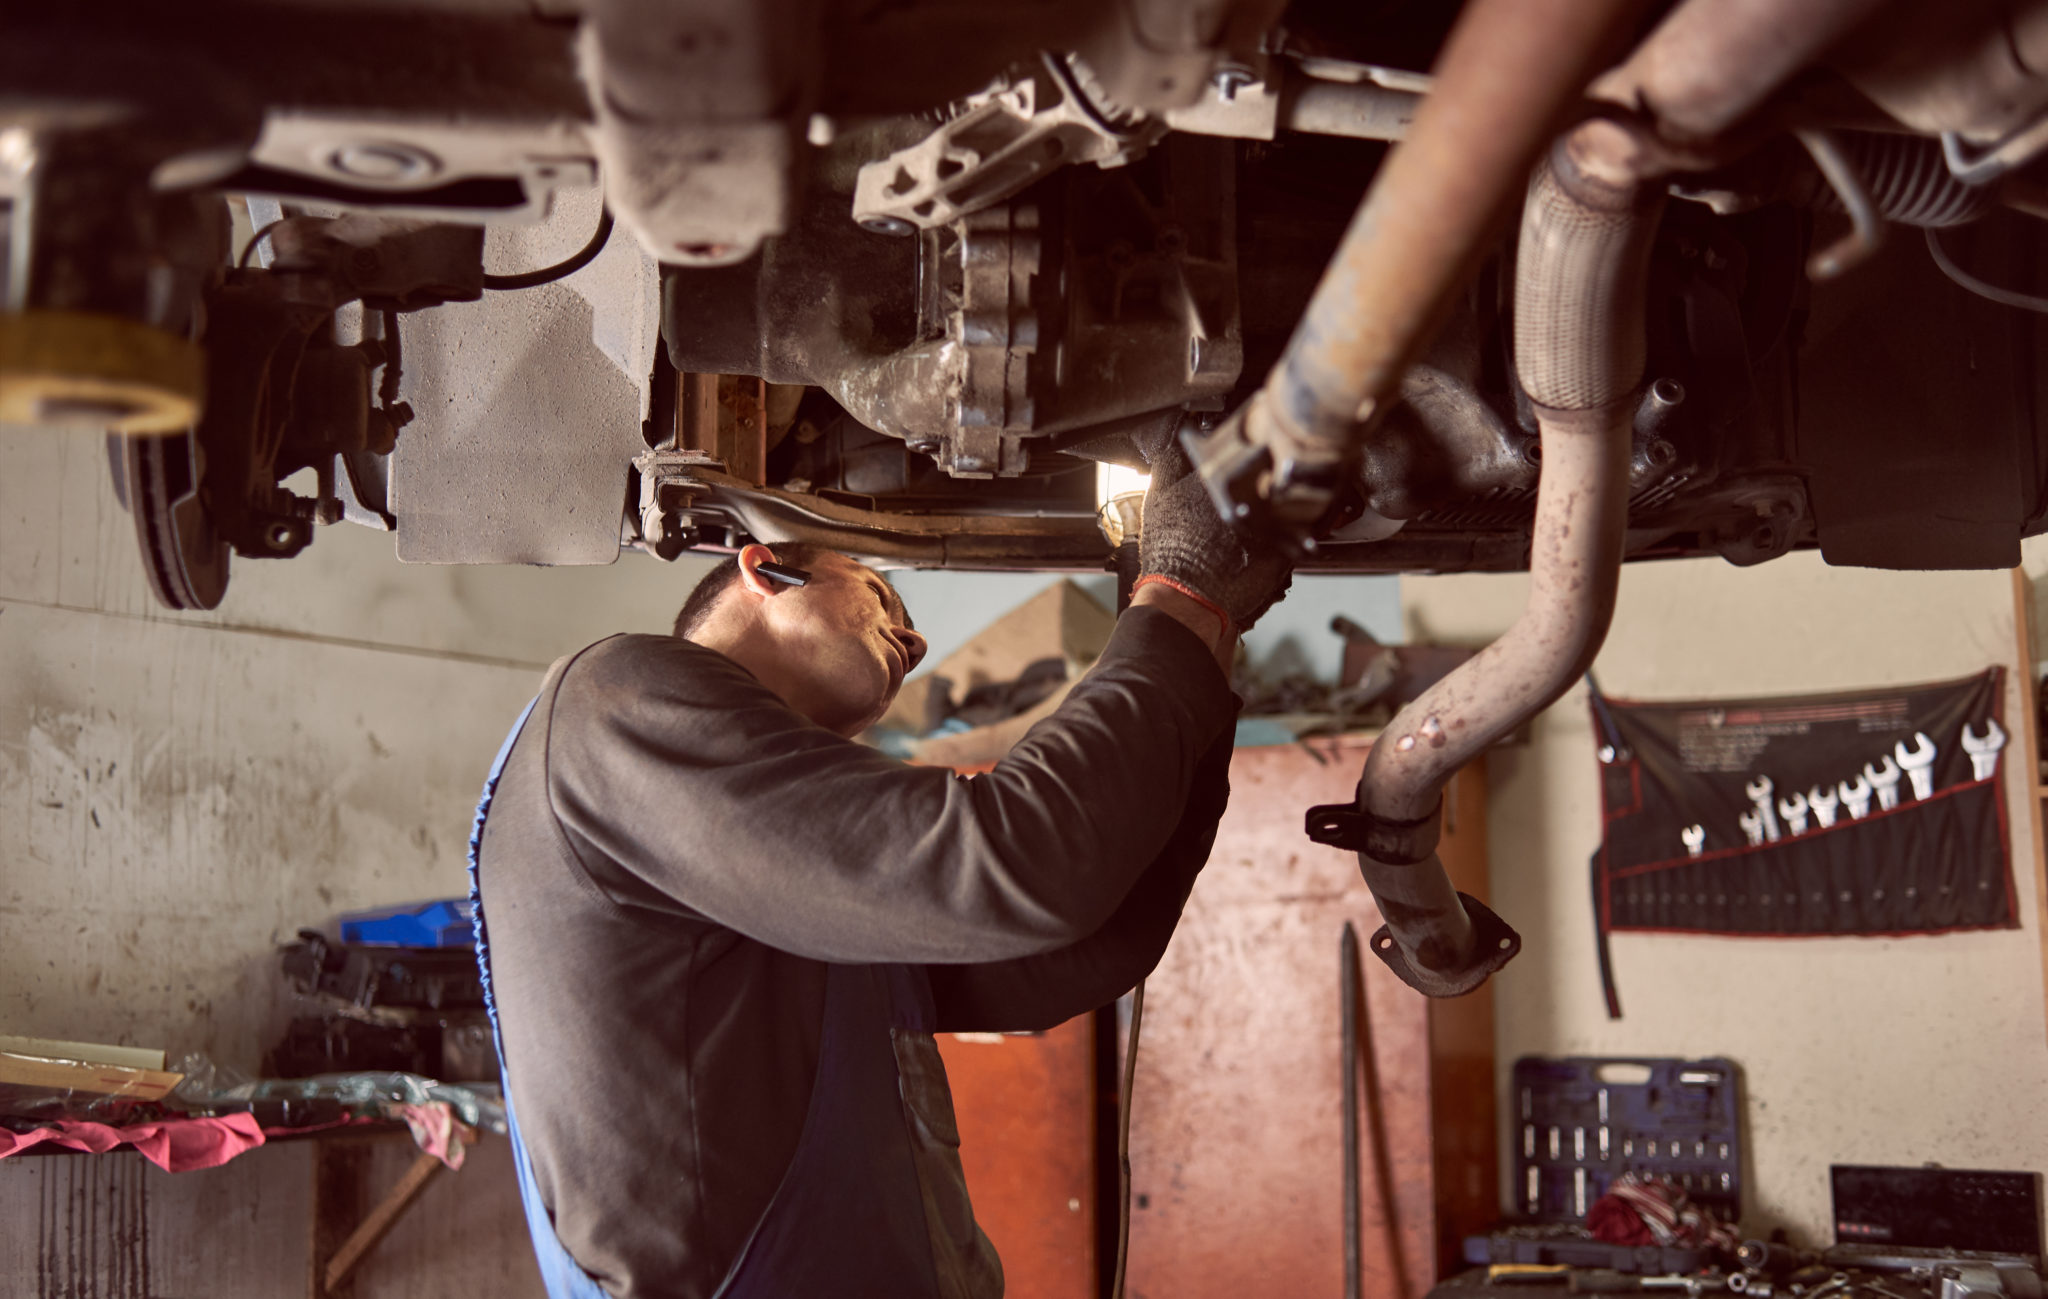 https://autolab.com.co/wp-content/uploads/2022/01/side-cropped-view-of-auto-repairman-bending-under-2022-05-17-05-58-22-utc-scaled.jpg